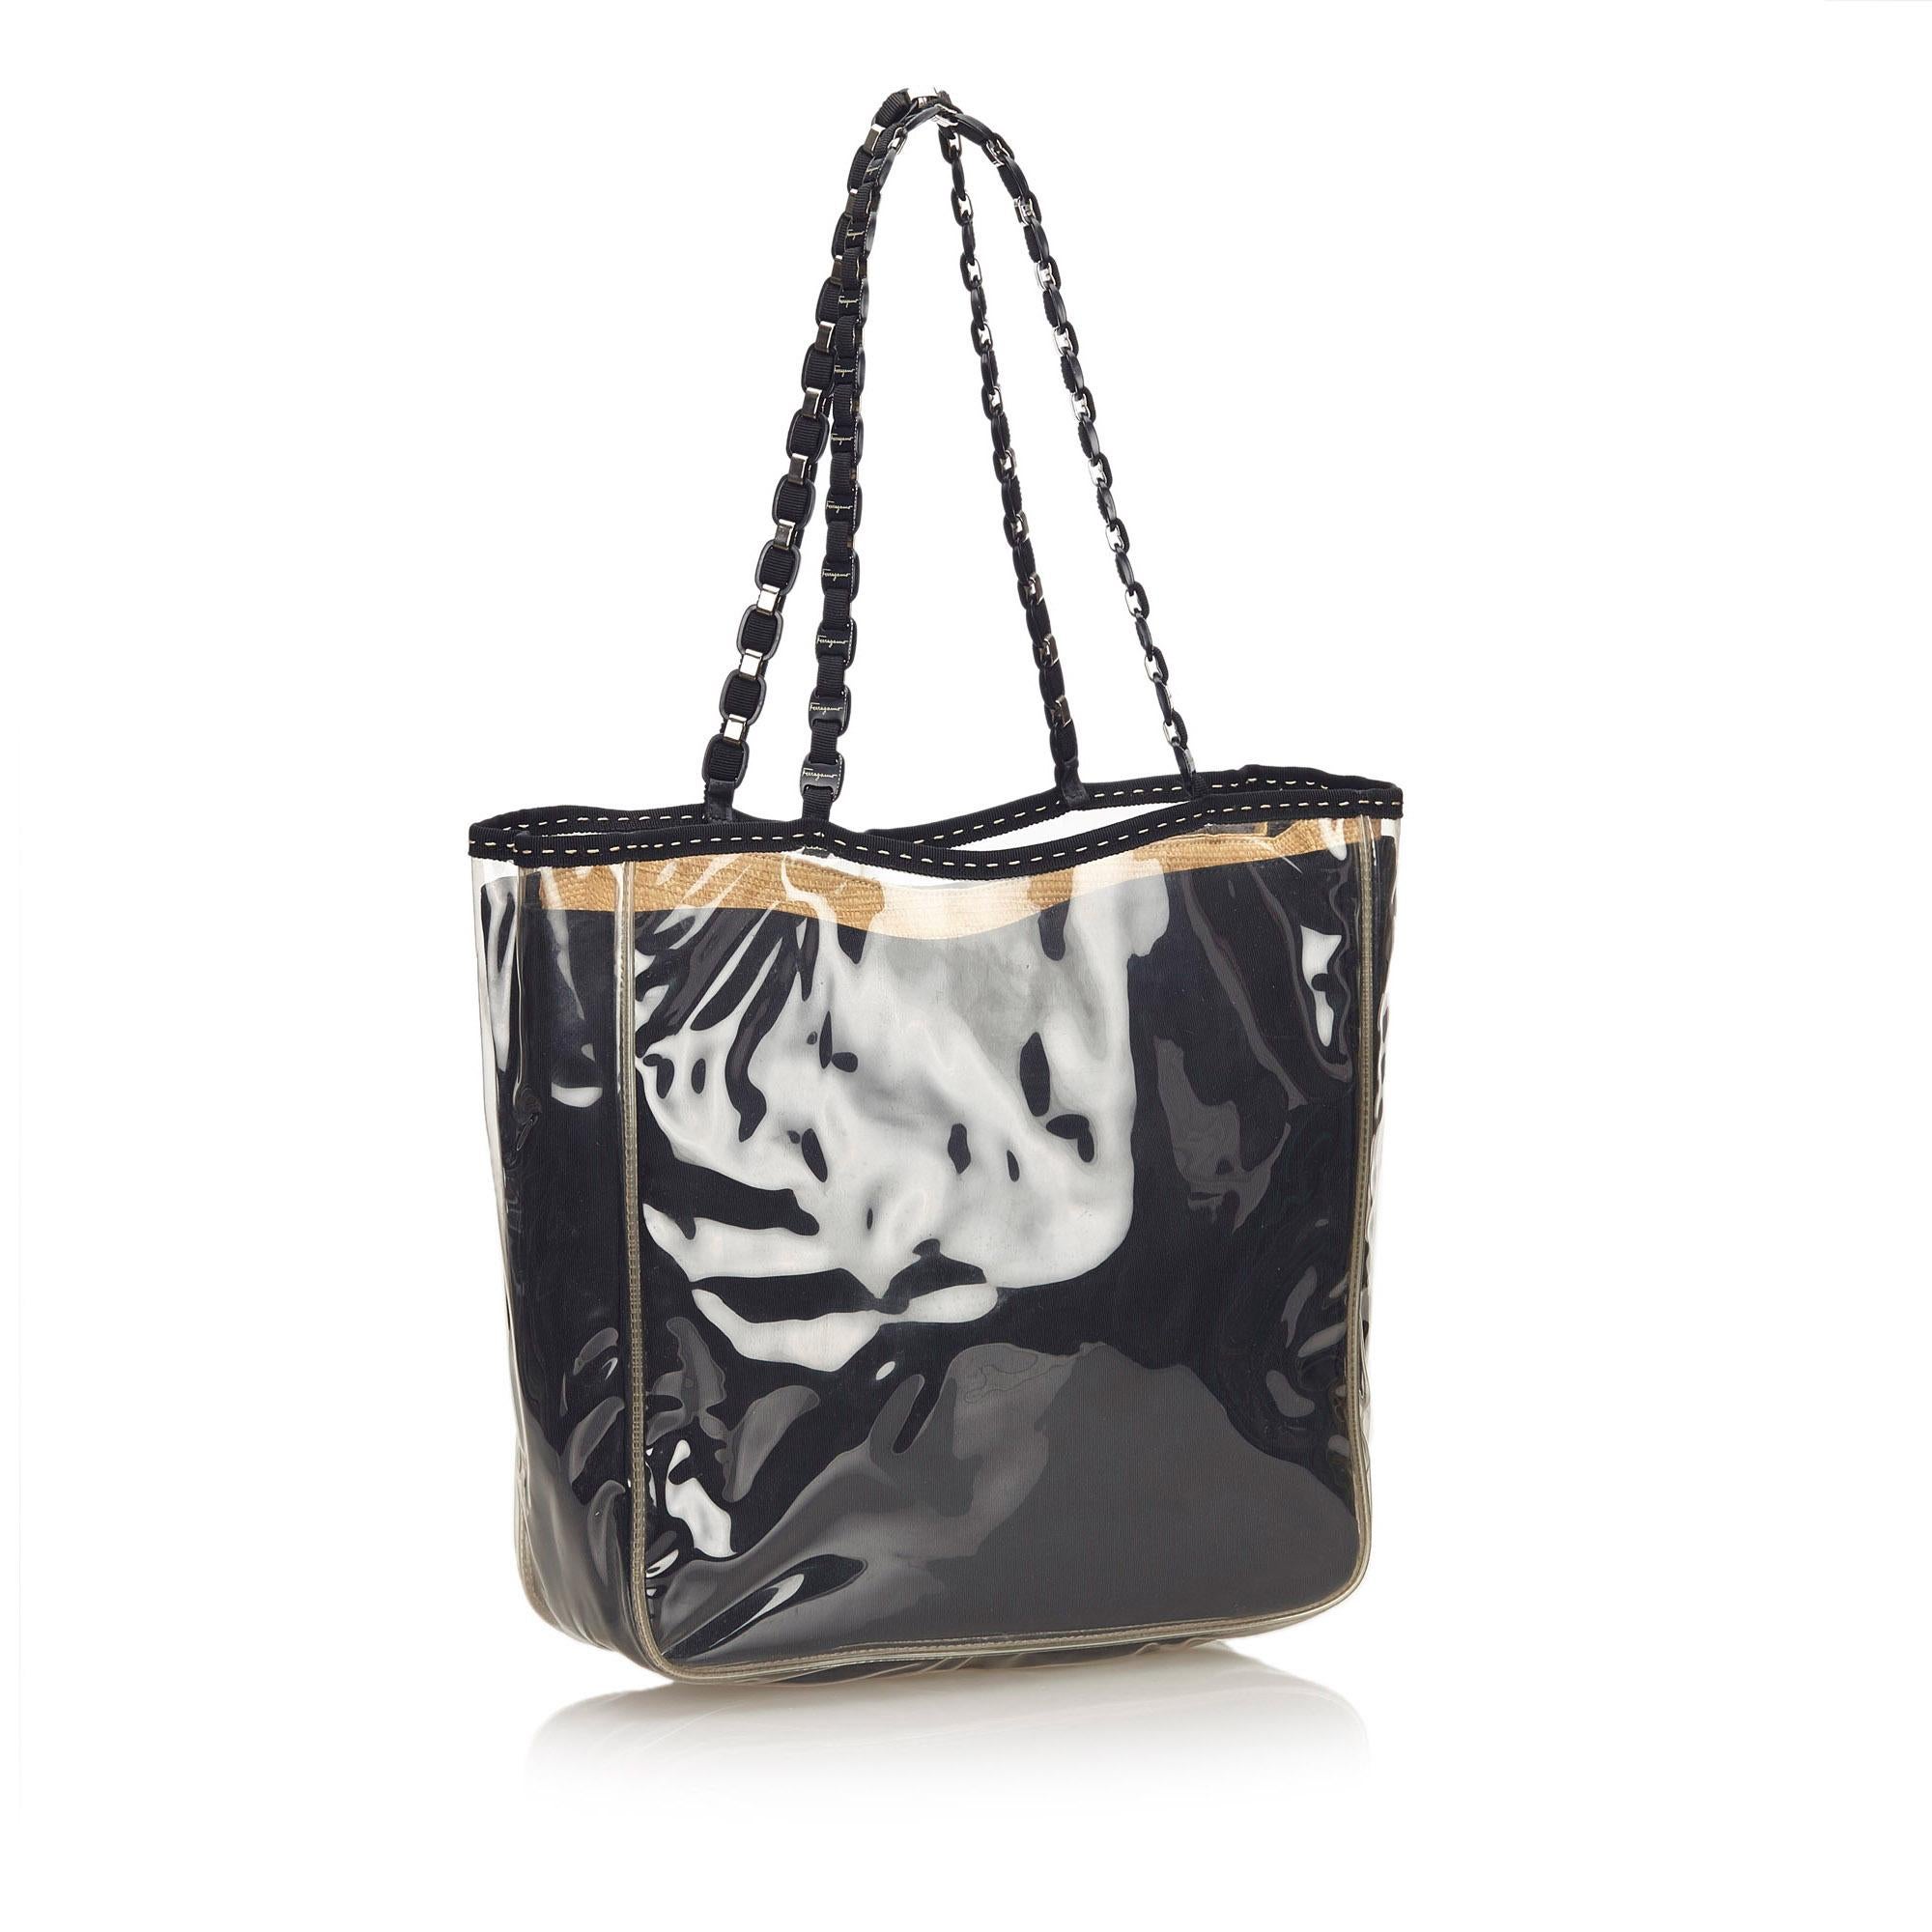 This tote bag features a vinyl body, flat nylon straps and top button closure. It carries a B condition rating.

Dimensions: 
Length 23 cm
Width 33 cm
Depth 11 cm

Inclusions: No longer comes with original accessories.

Color: Black

Material: